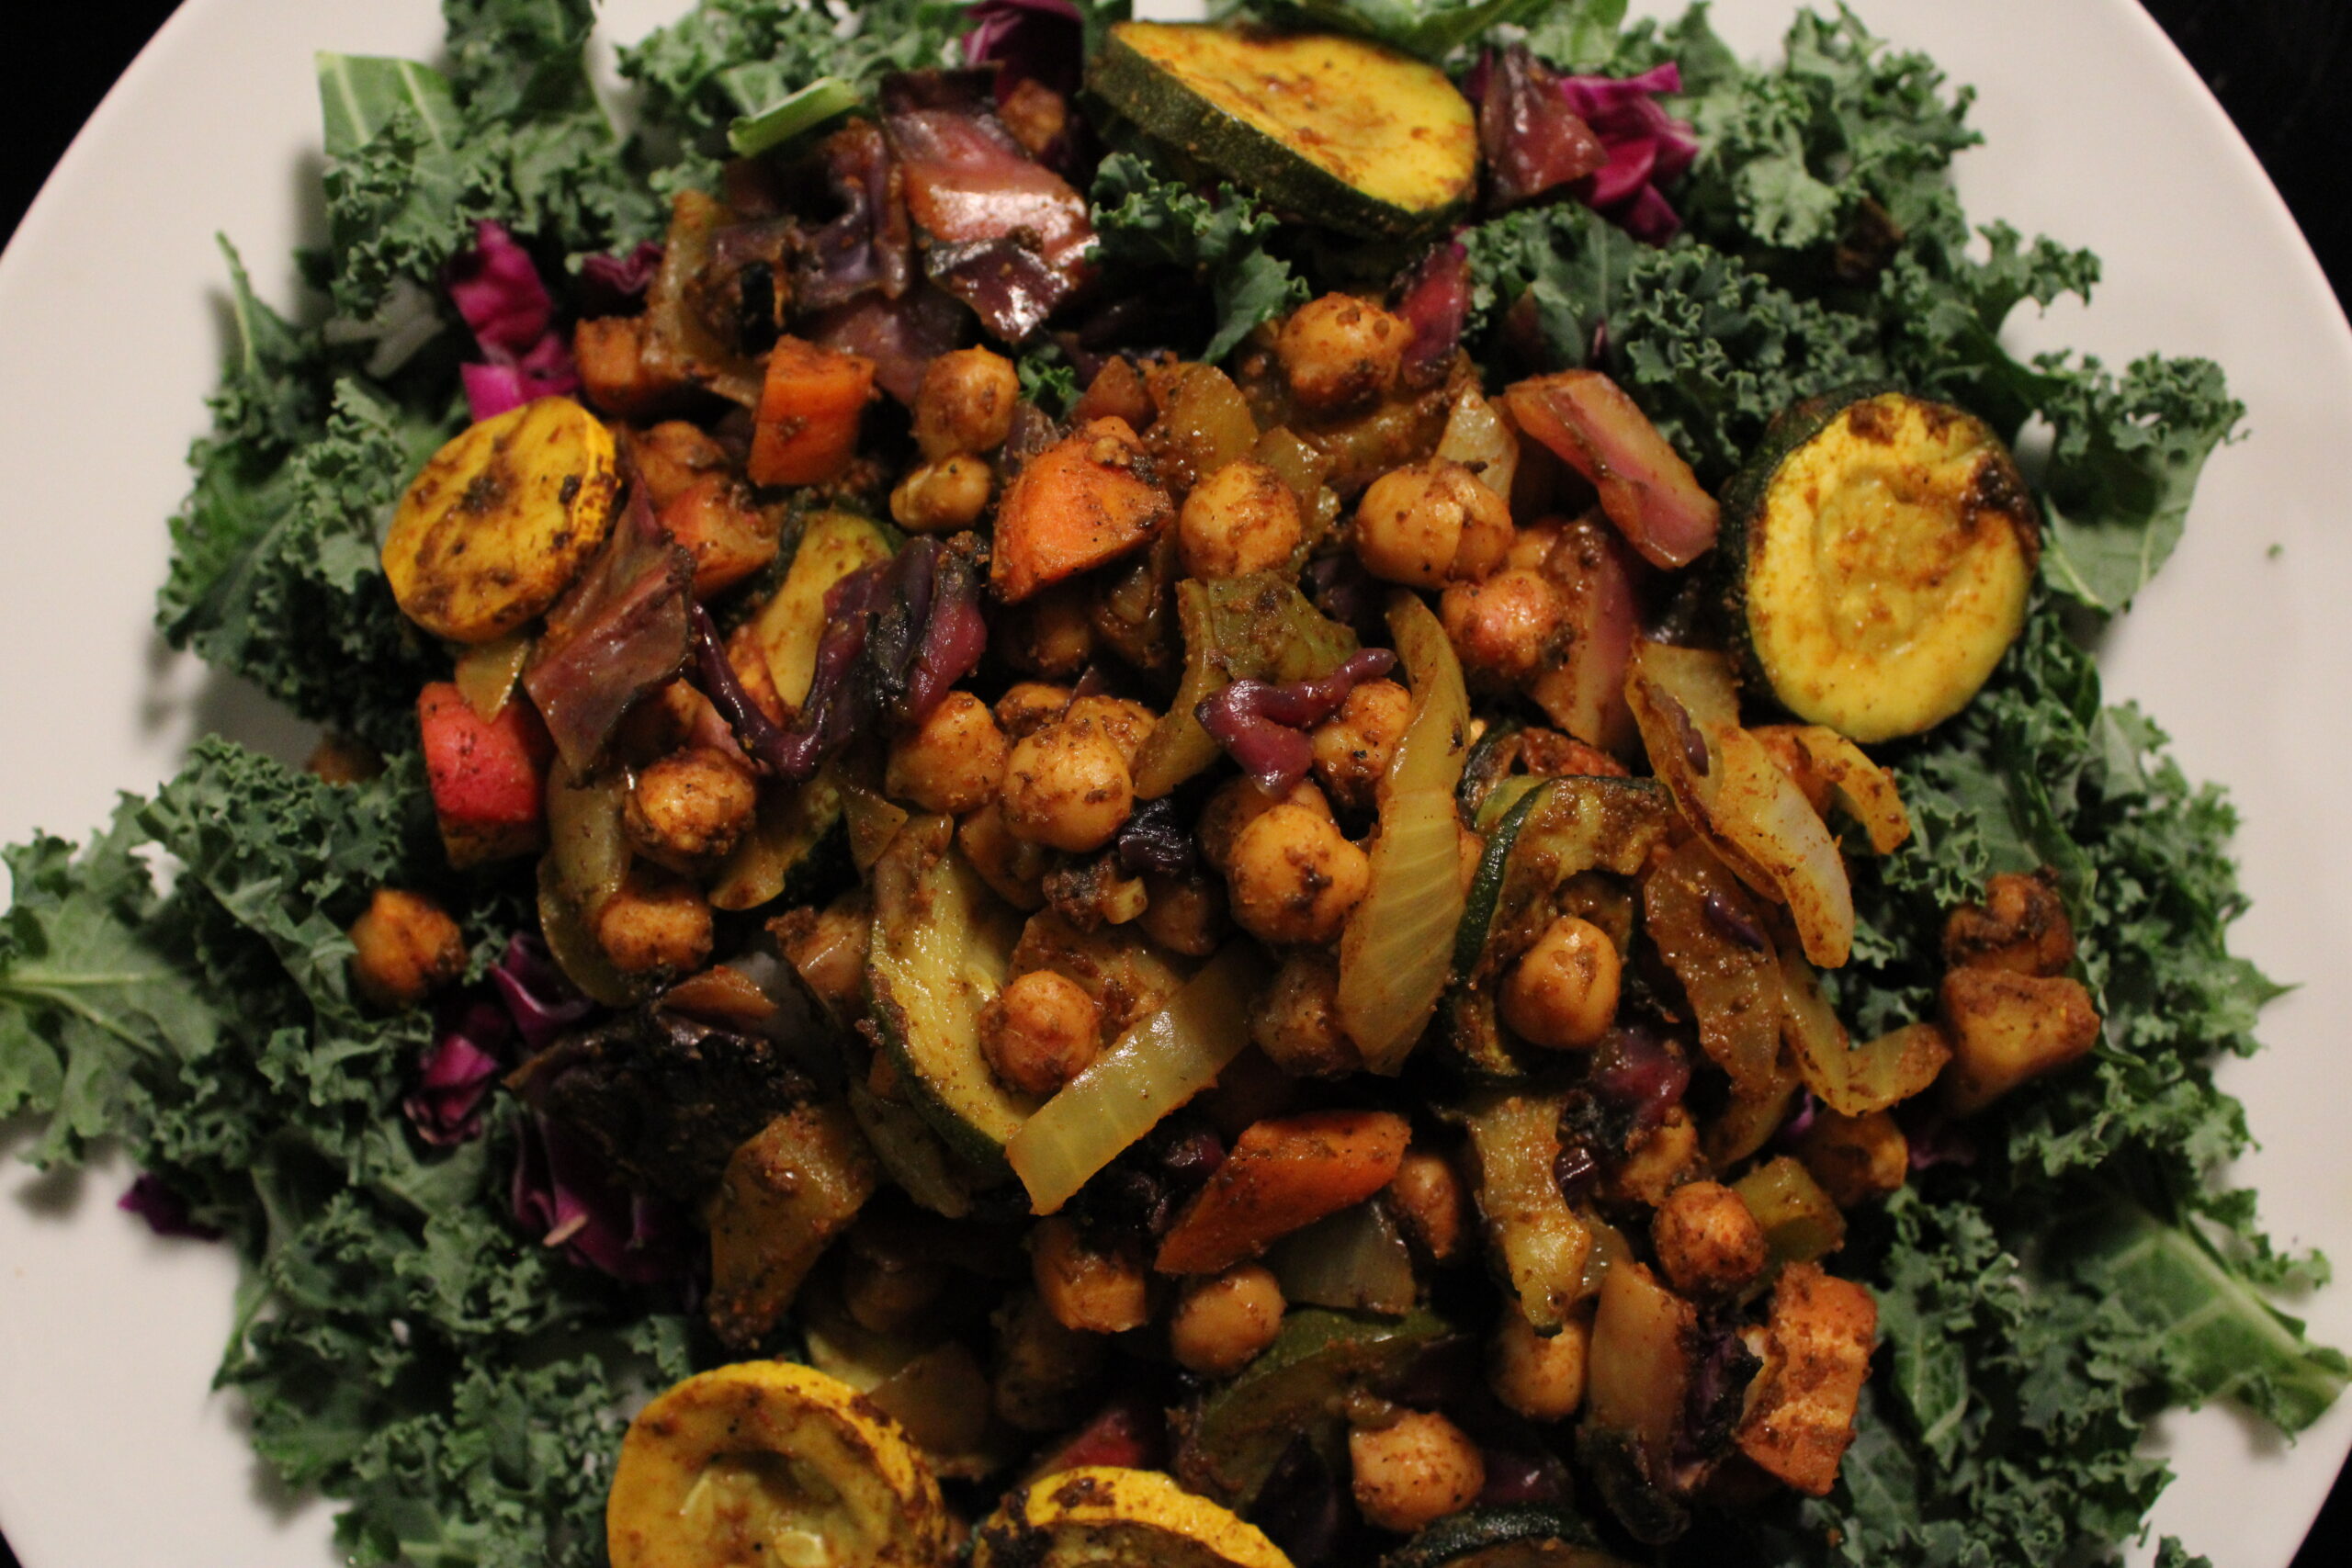 Roasted Spiced Chickpeas & Greens